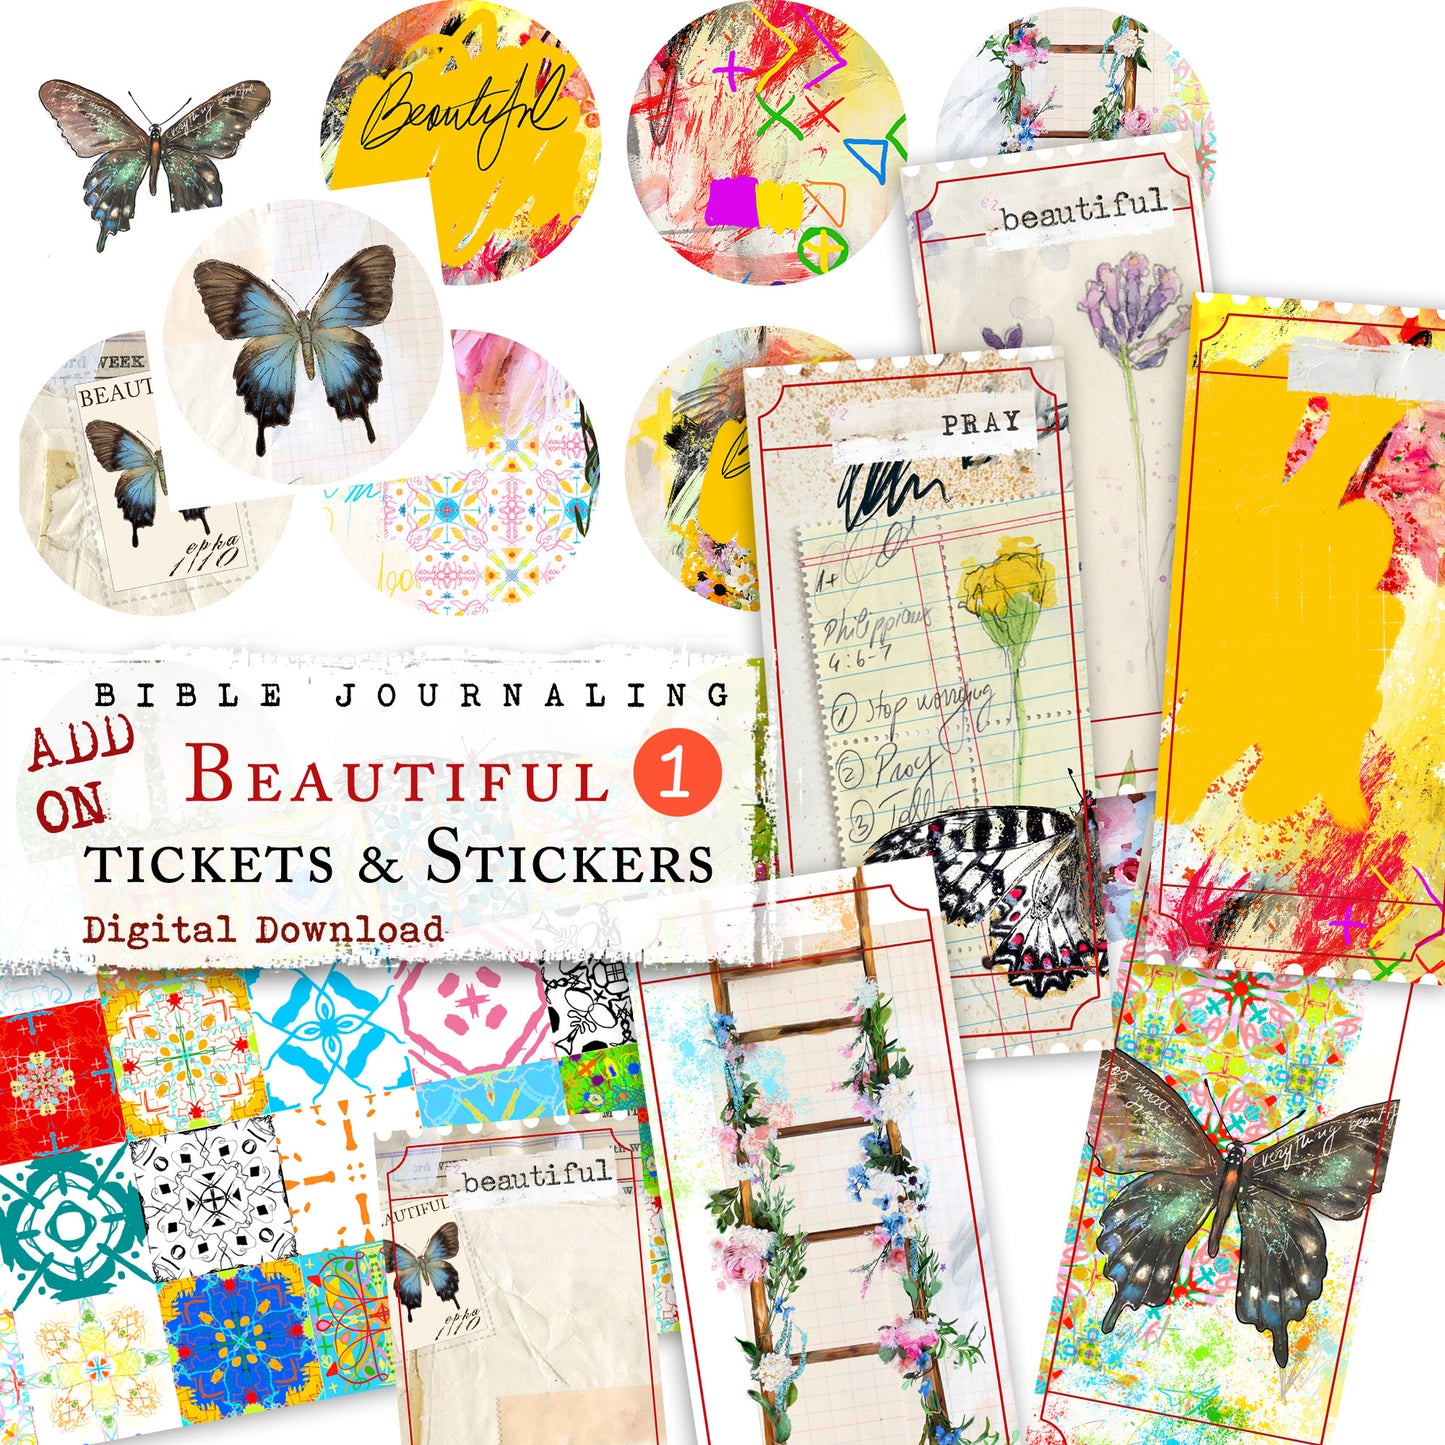 ADD ON Beautiful (Songs of Wonder) - Tickets and Stickers- digital download